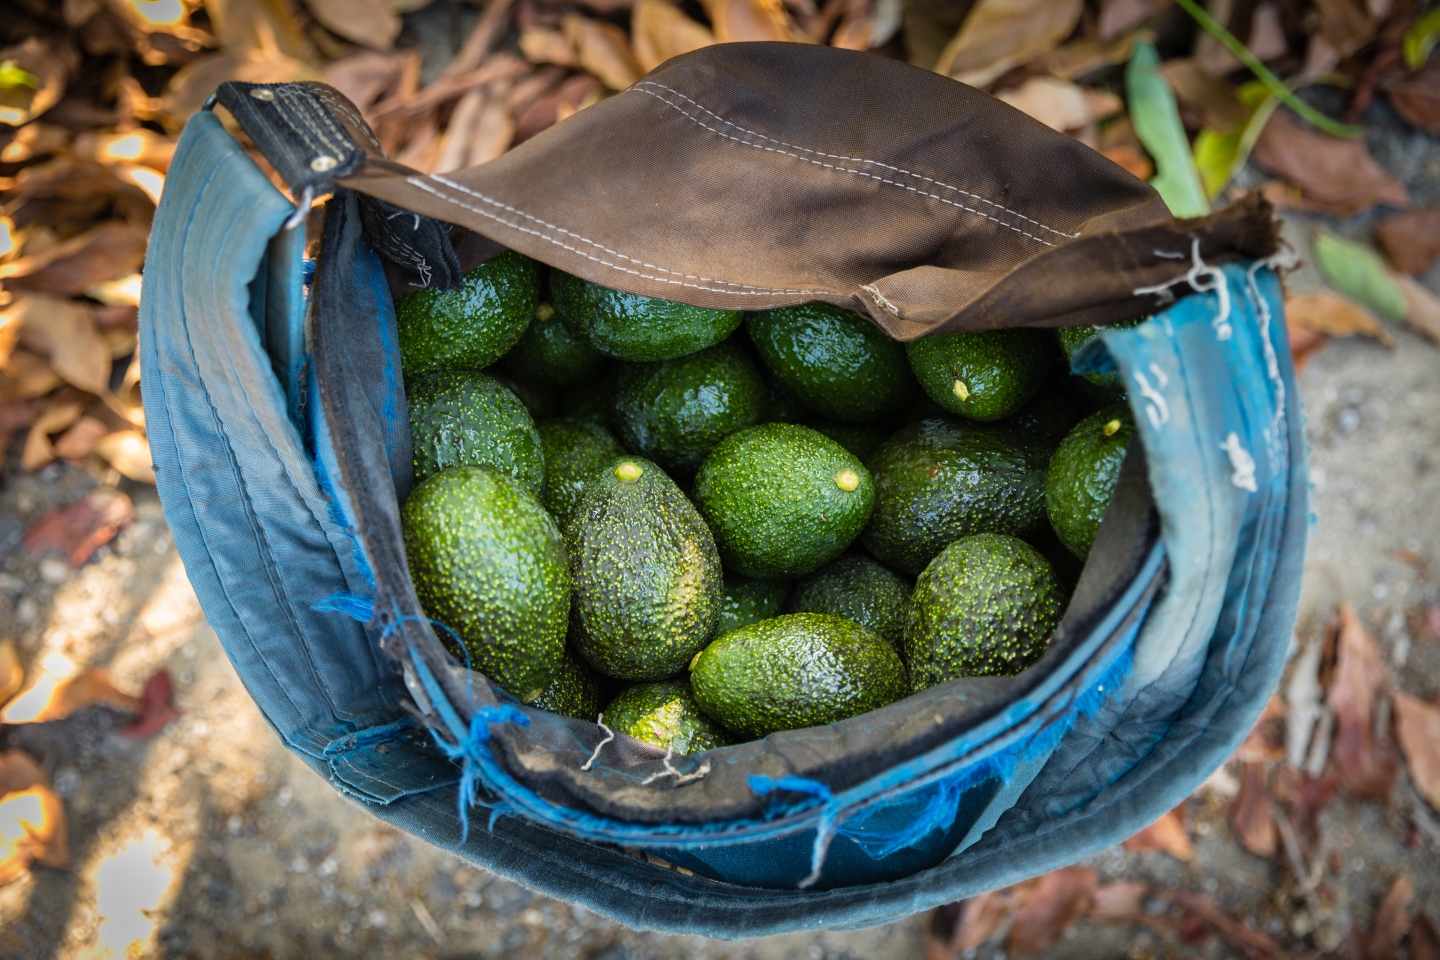 Exports of avocados and blueberries from California to China allowed